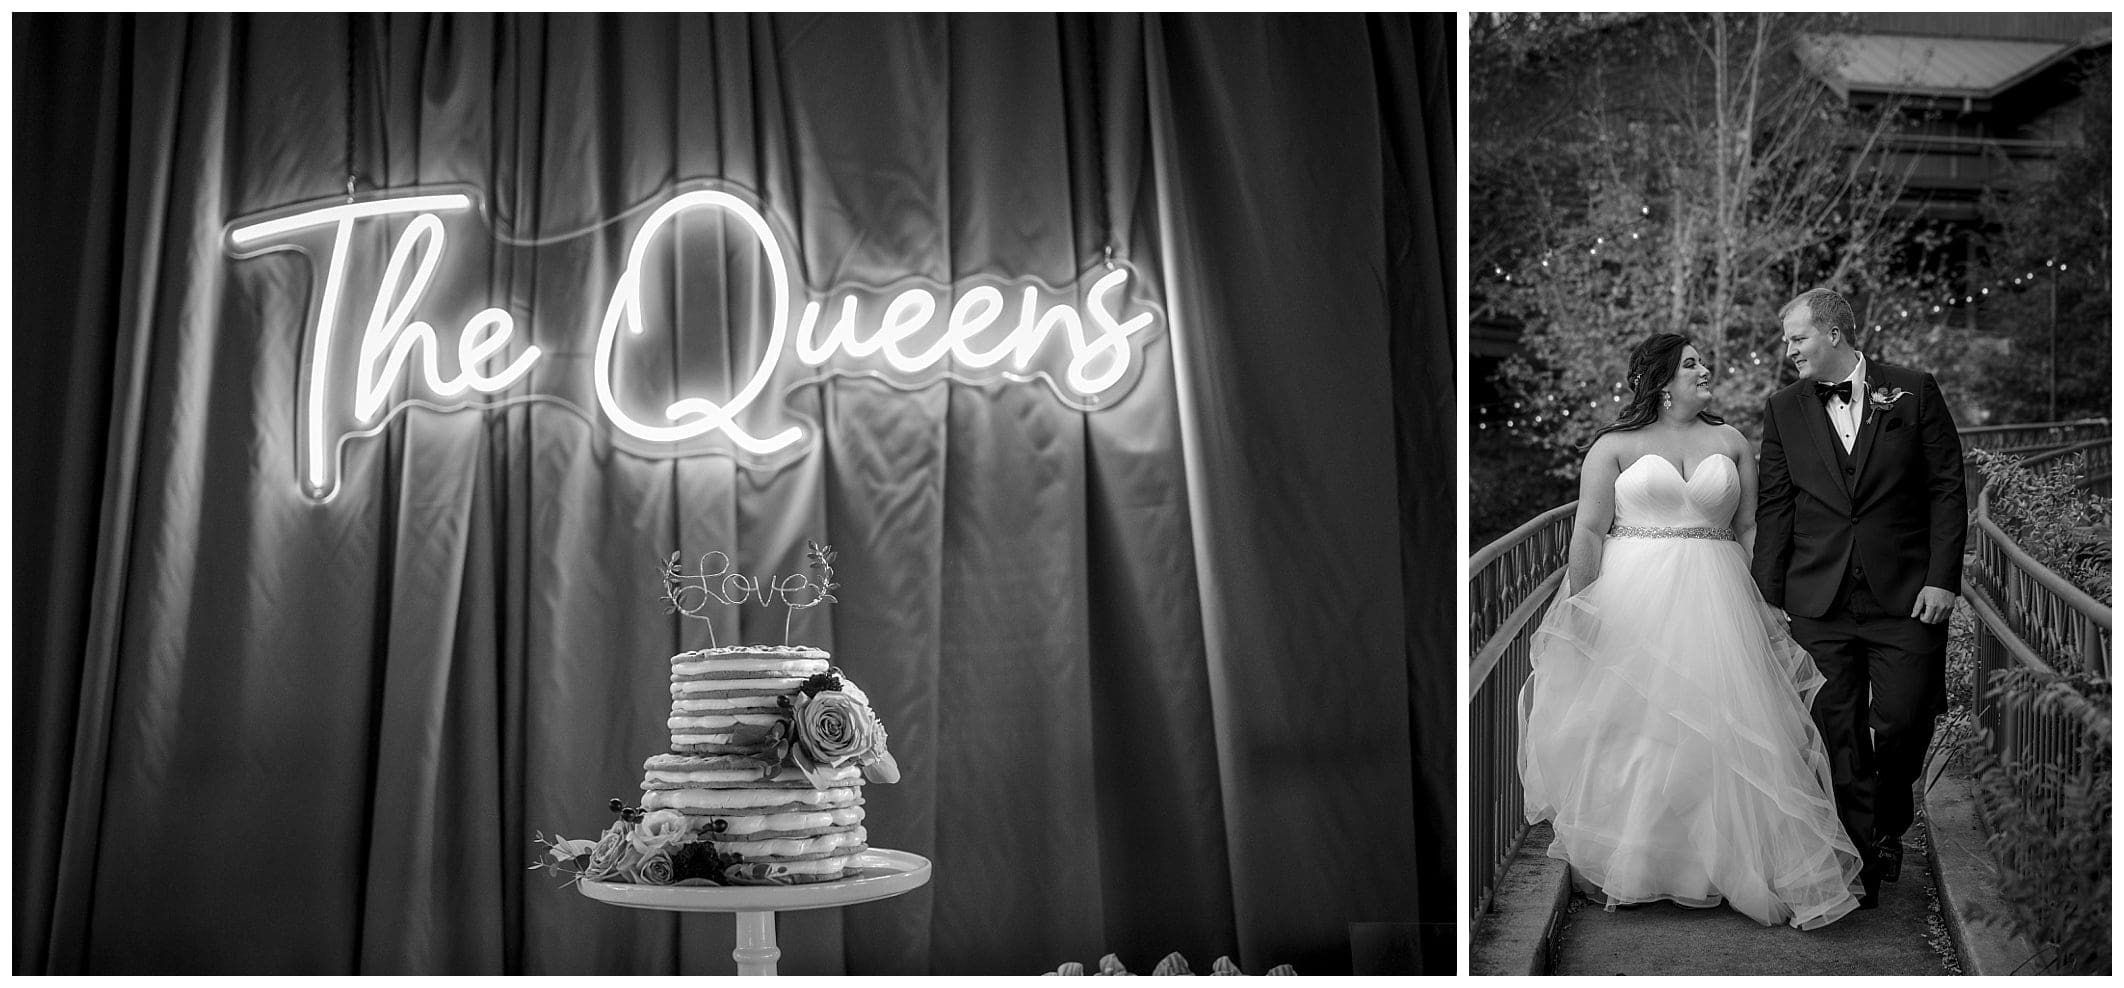 black and white wedding photo of a cake and neon sign and couple walking